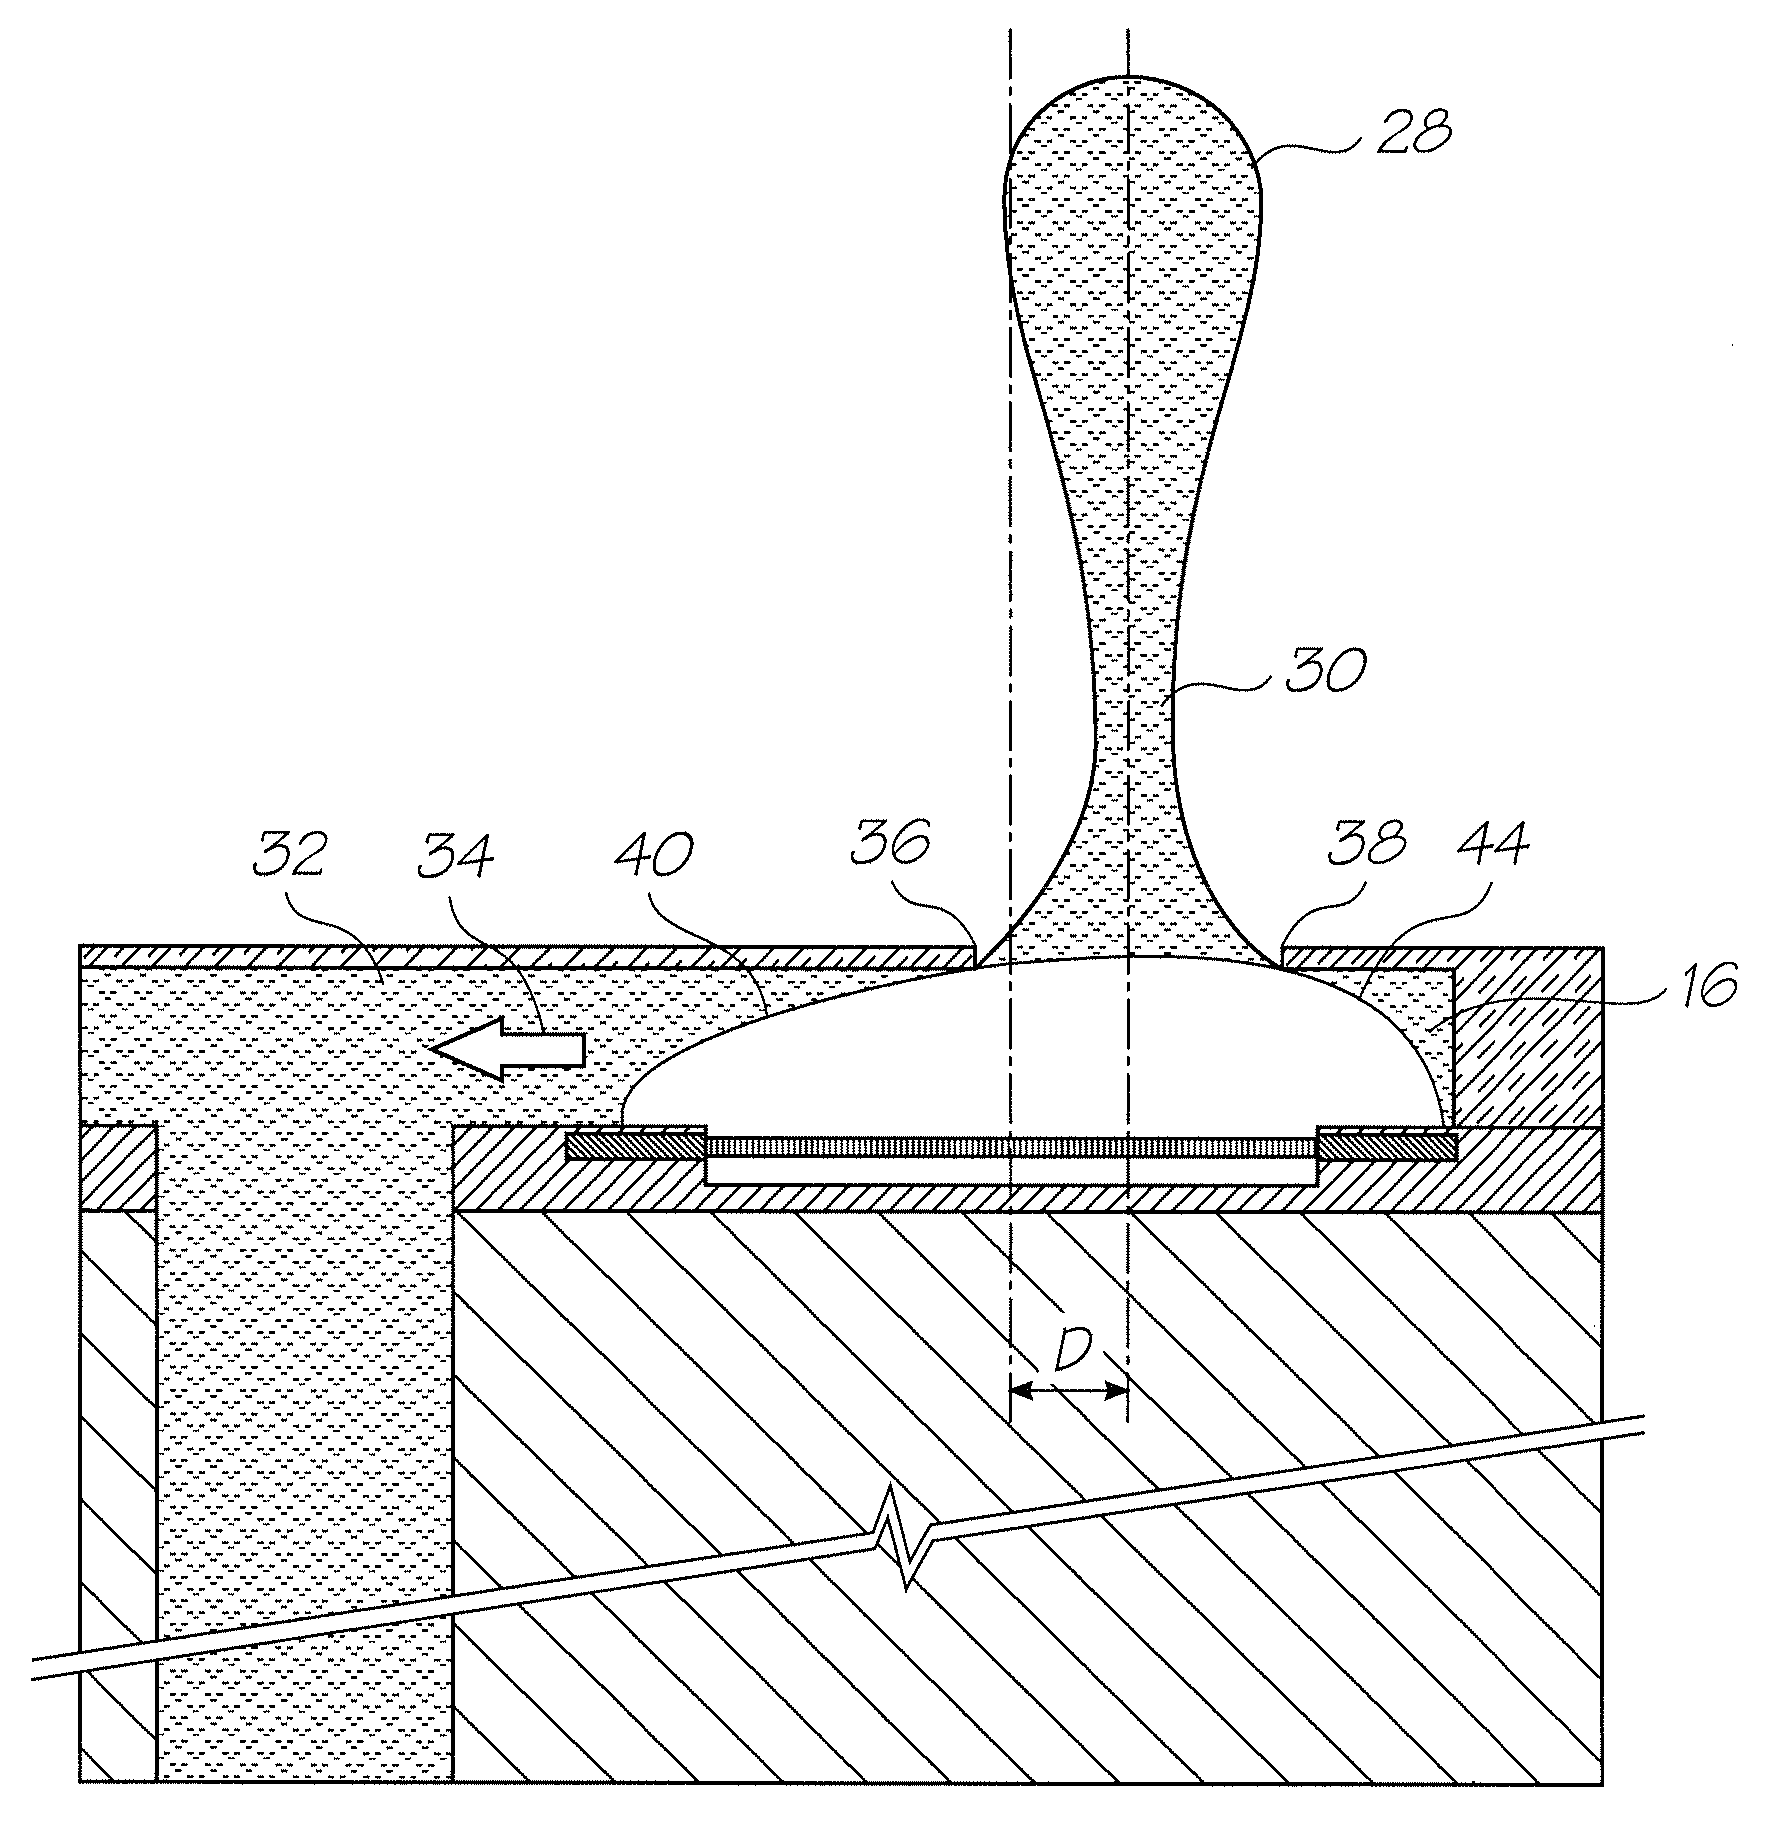 Printhead with heaters offset from nozzles